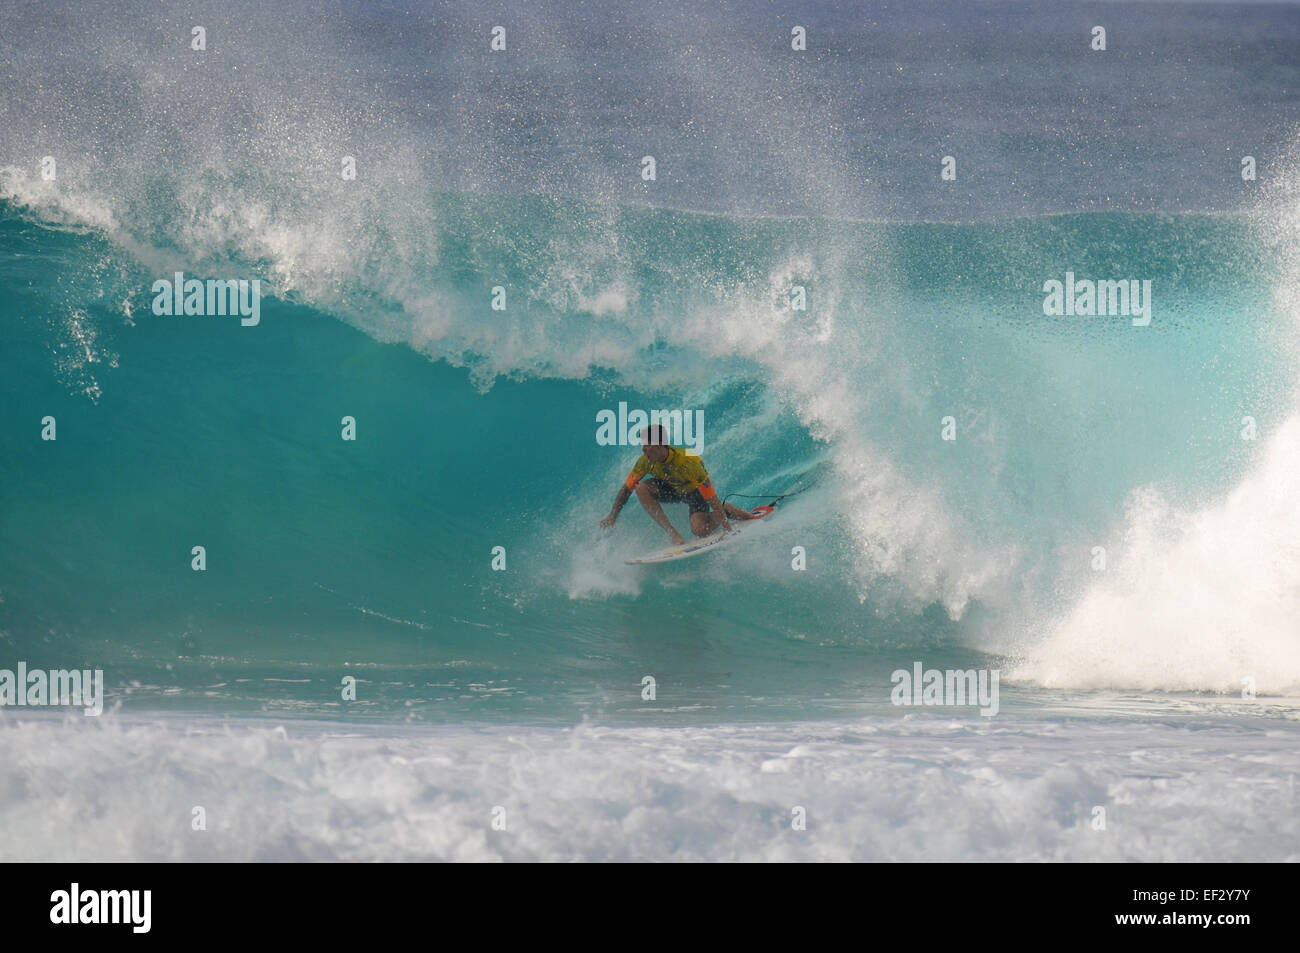 Brazilian pro-surfer, Gabriel Medina, rides the 'backdoor' and scores a 10 at the 2014 Pipemasters, Banzai Pipeline, Hawaii Stock Photo